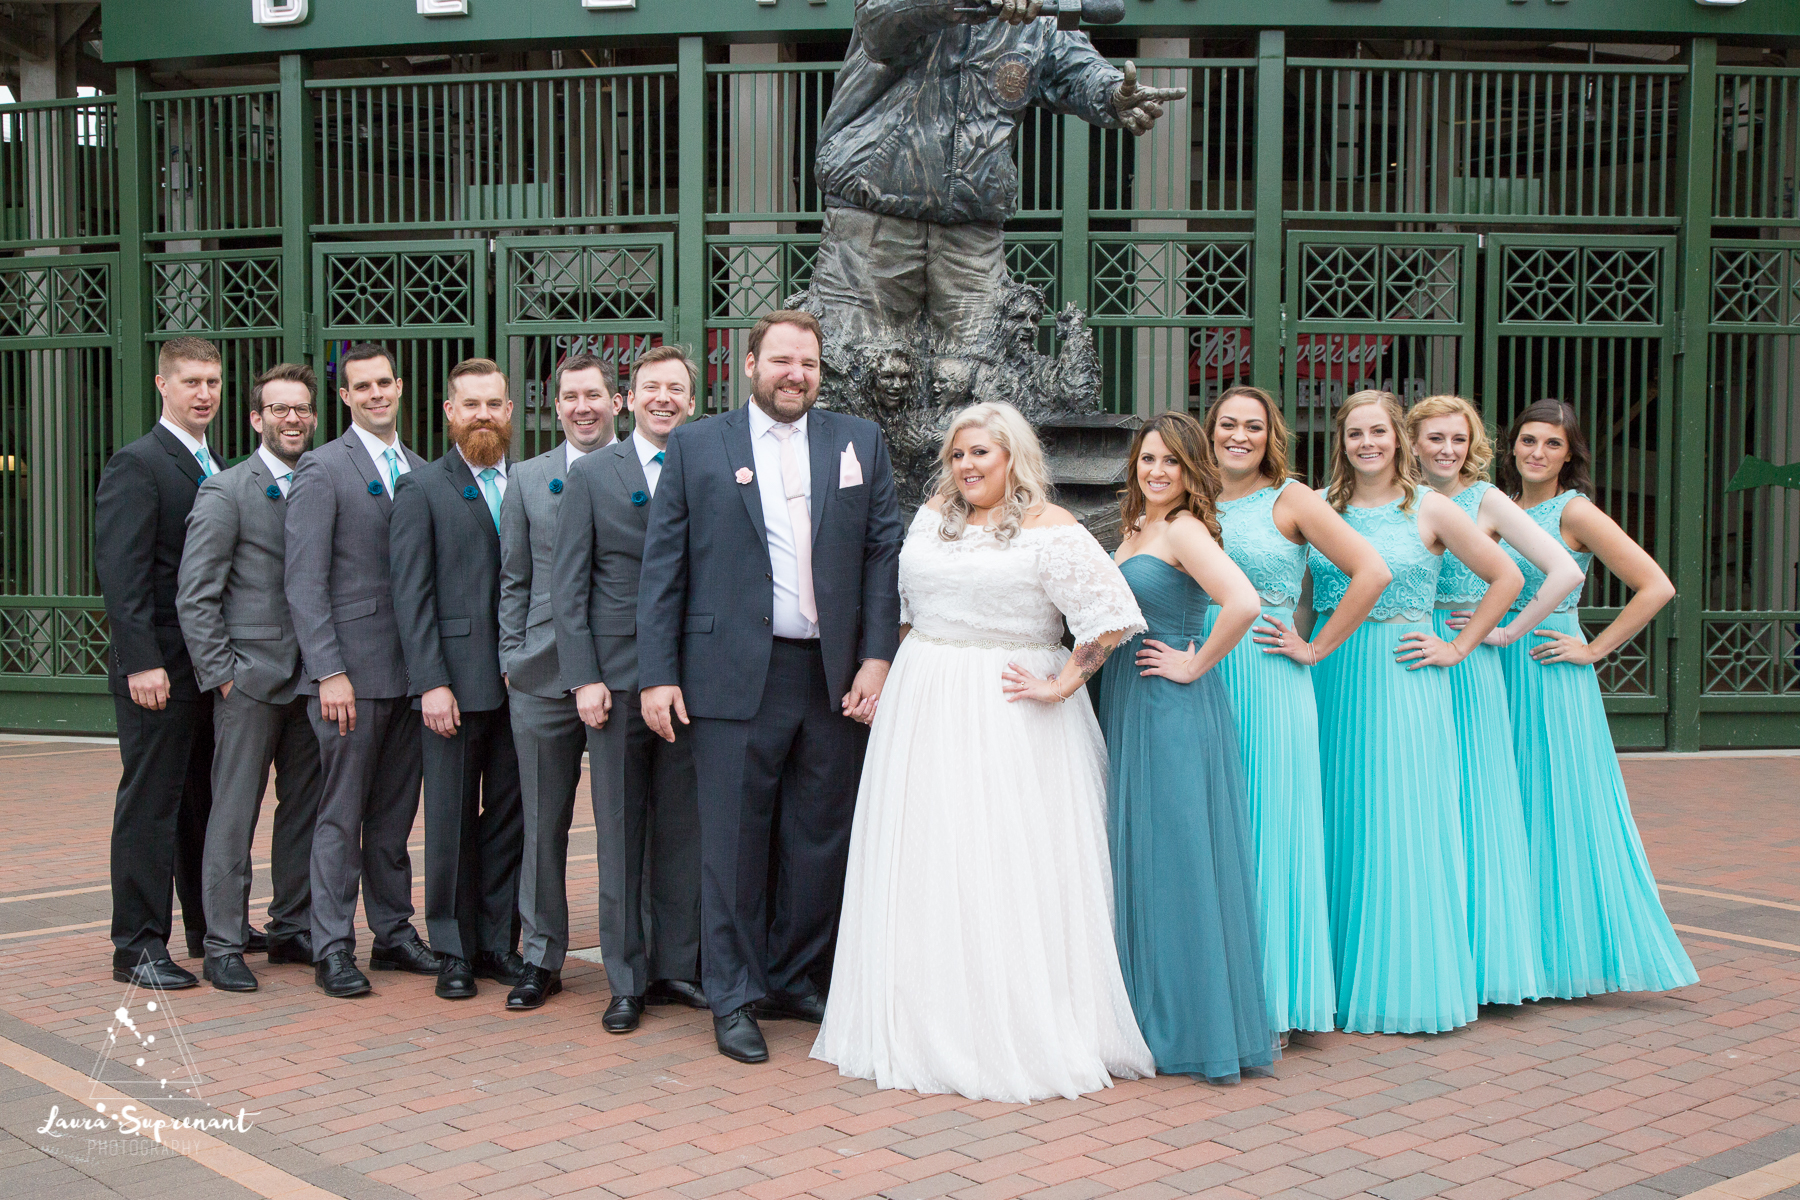 wedding_photography_chicago_wrigley_field_ravenswood_event_center_laura_suprenant (38 of 82).jpg